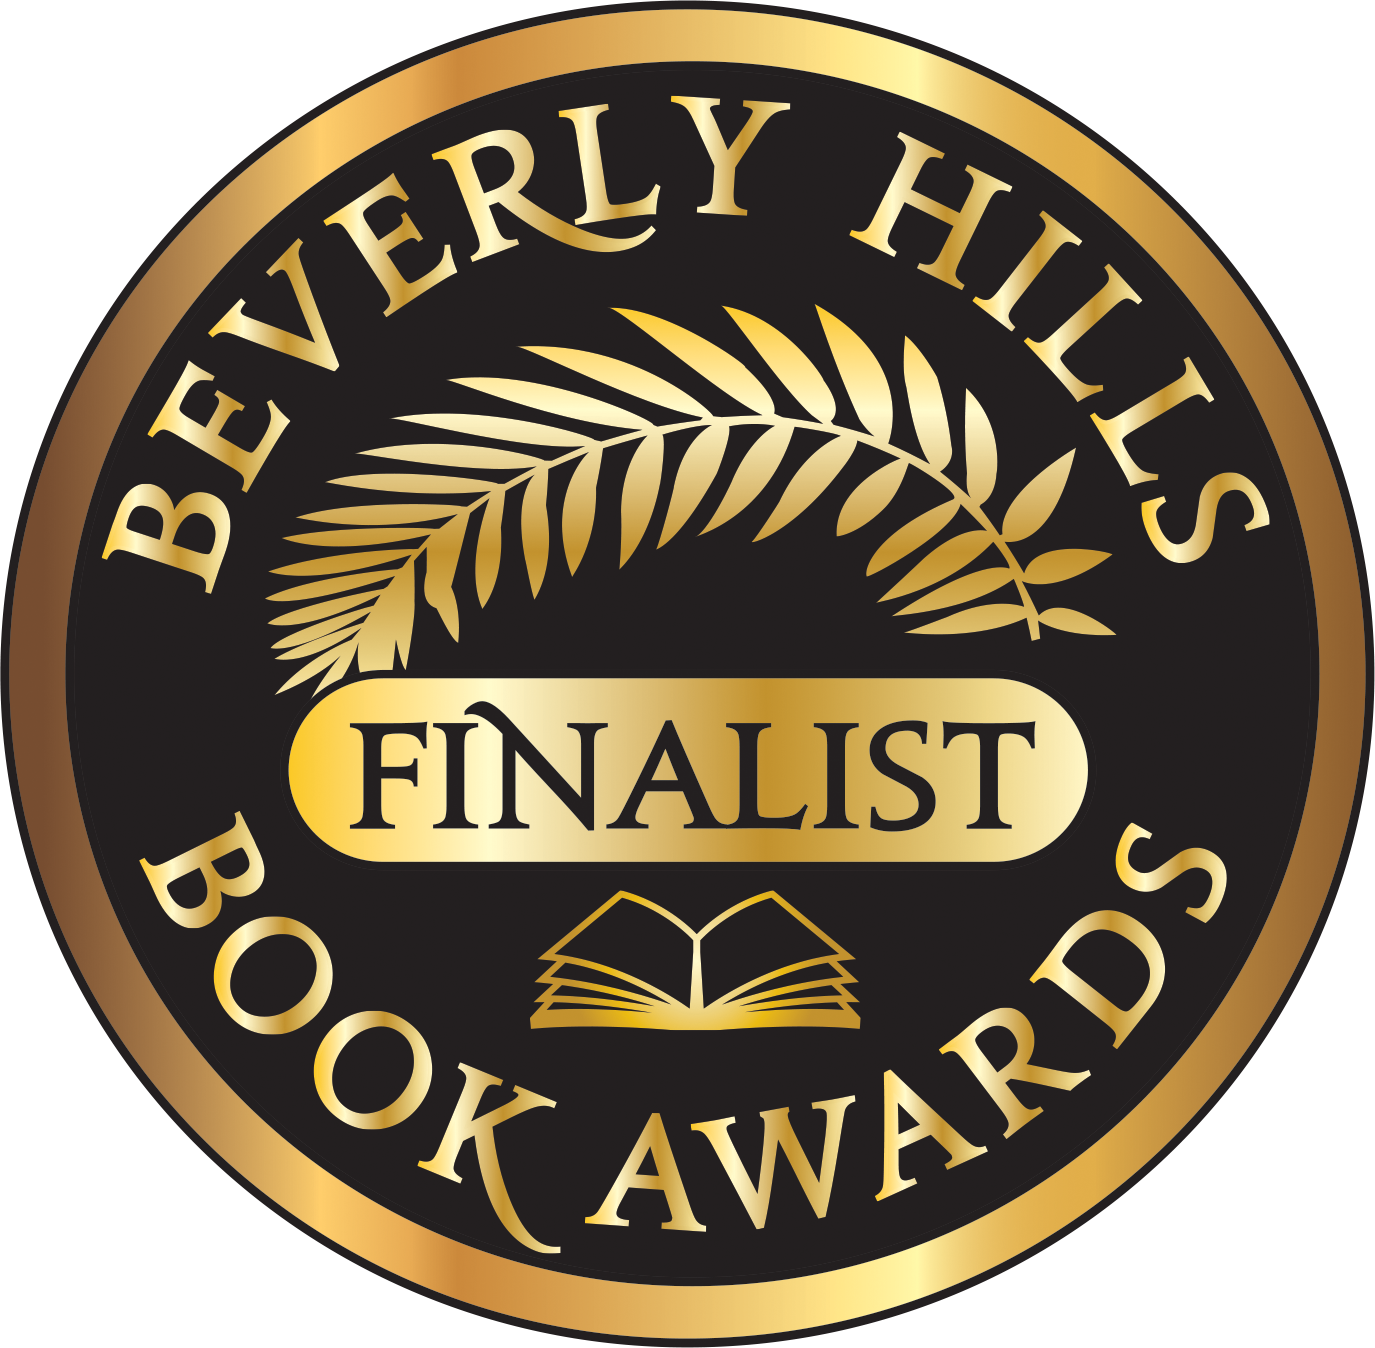 Deidre Madsen's Beverly Hills 2015 FINALIST AWARD-WINNING Happily Inner After - A Guide to Getting and Keeping Your Knight in Shining Amour, Balboa Press, a Division of Hay House Publishing